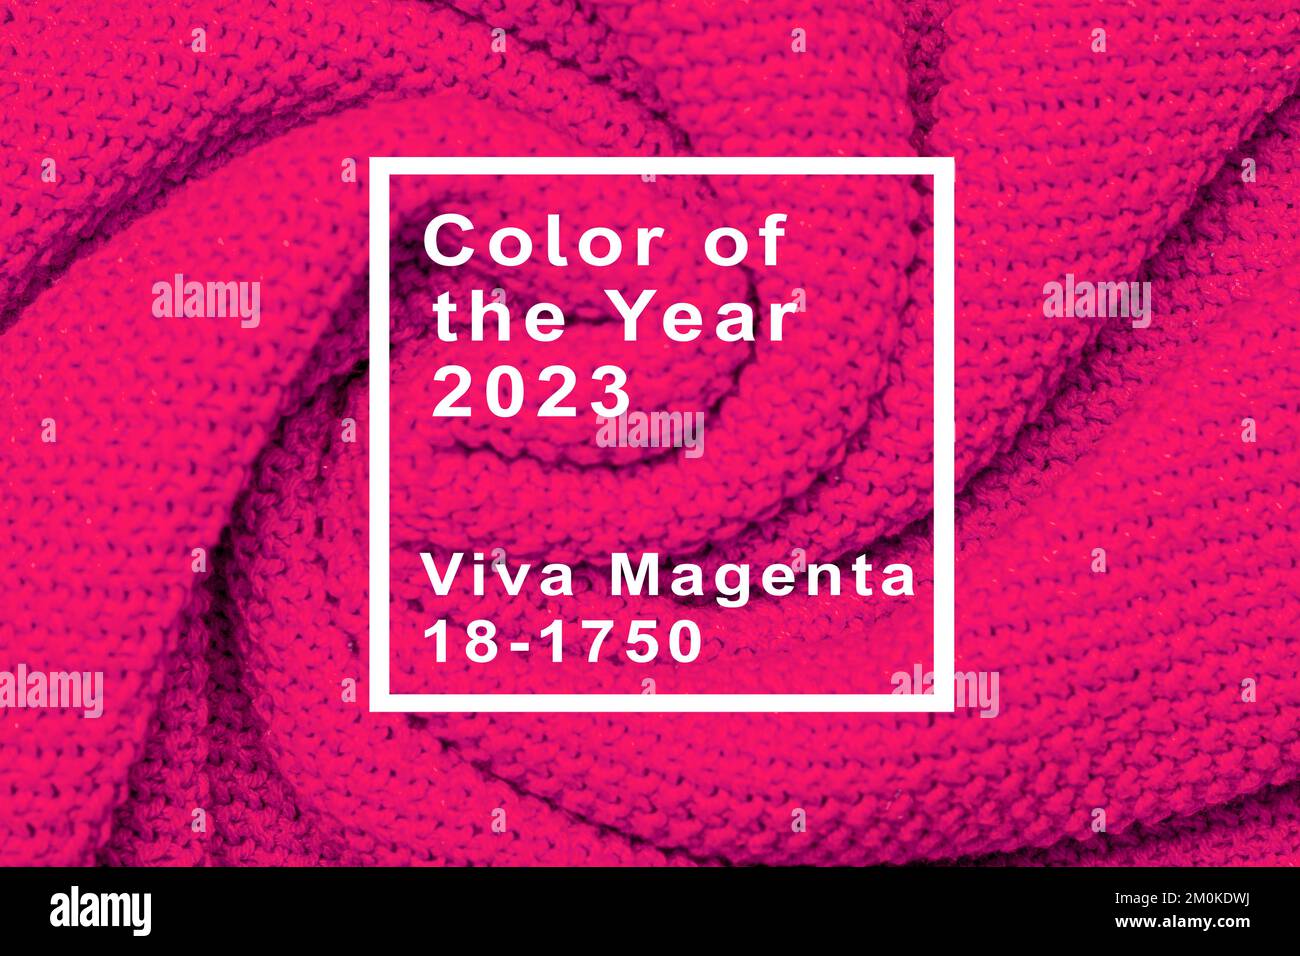 The texture of warm knitted sweater. Beautiful handmade knitted repeating pattern. Demonstrating Pantone color of the year 2023 viva magenta. Stock Photo